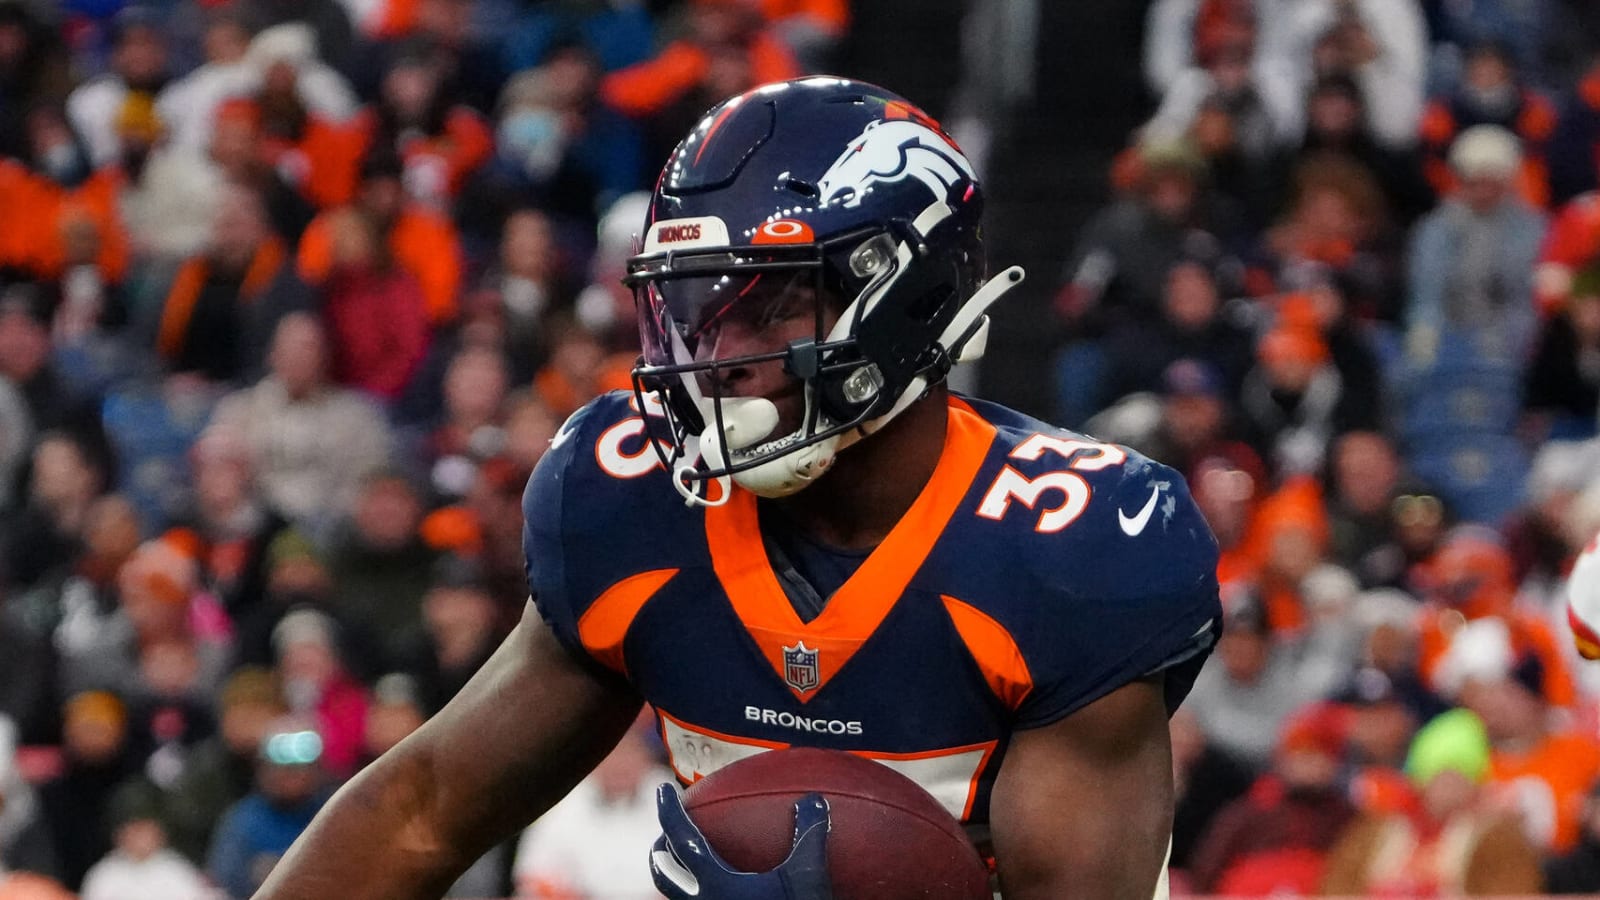 Fantasy owners should take a flier on Broncos RB Javonte Williams